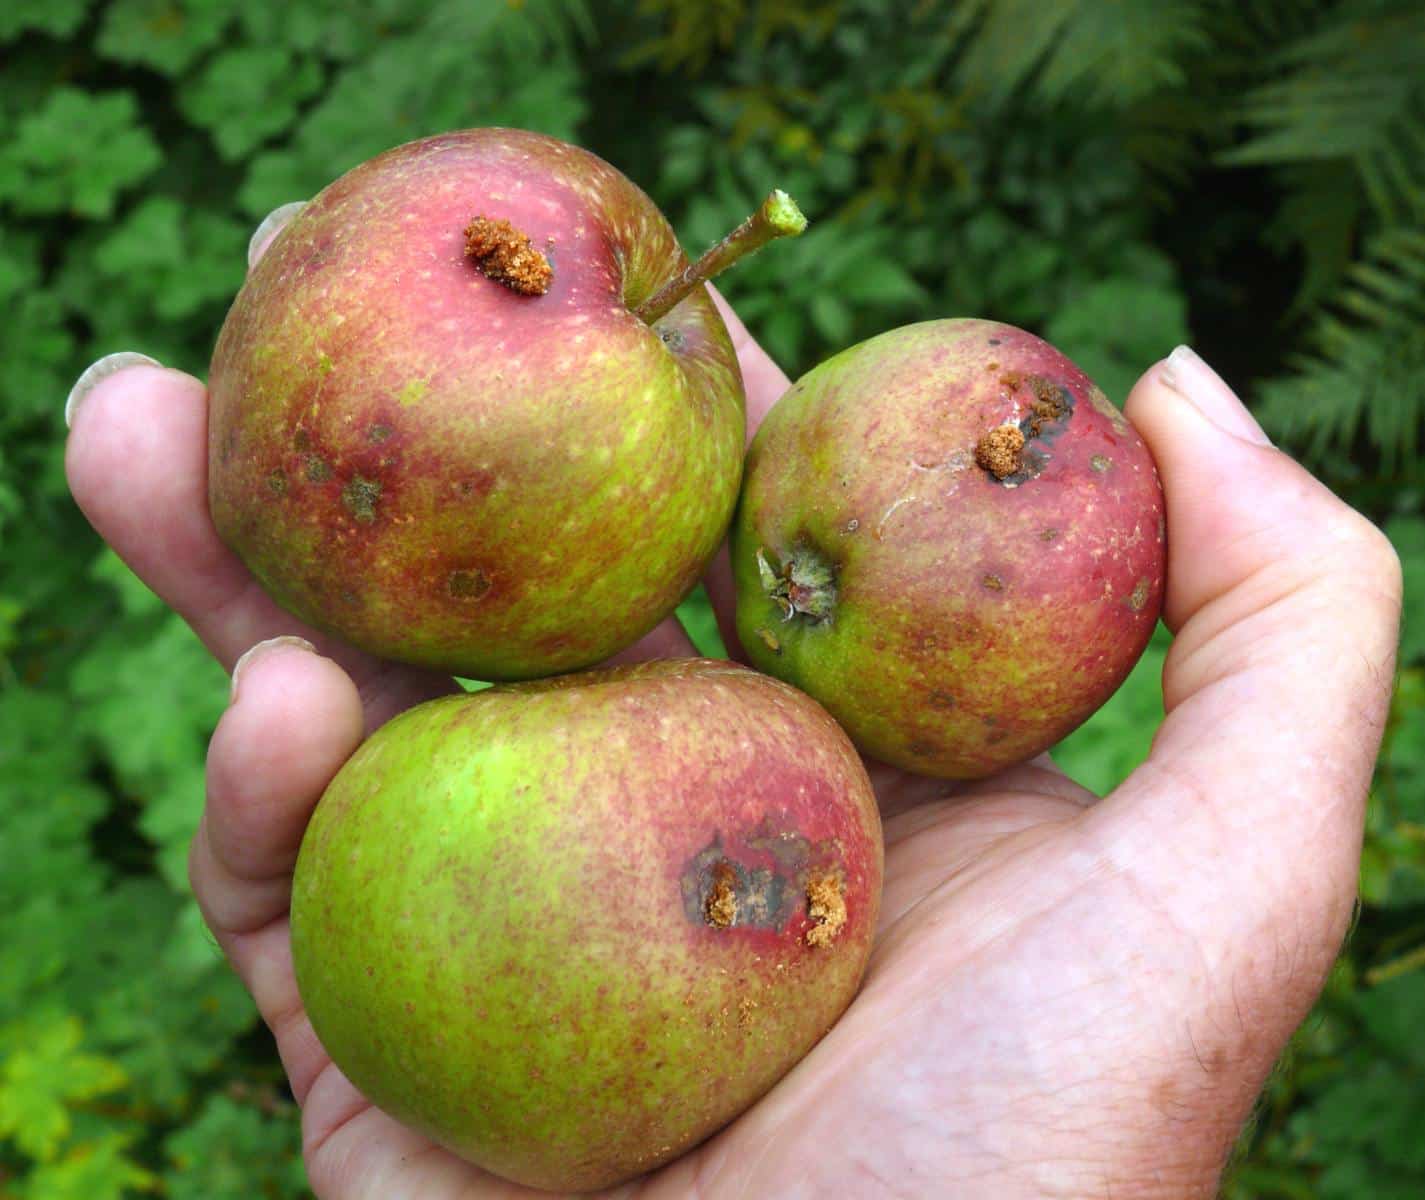 Three apples infected with codling moth fruit worms